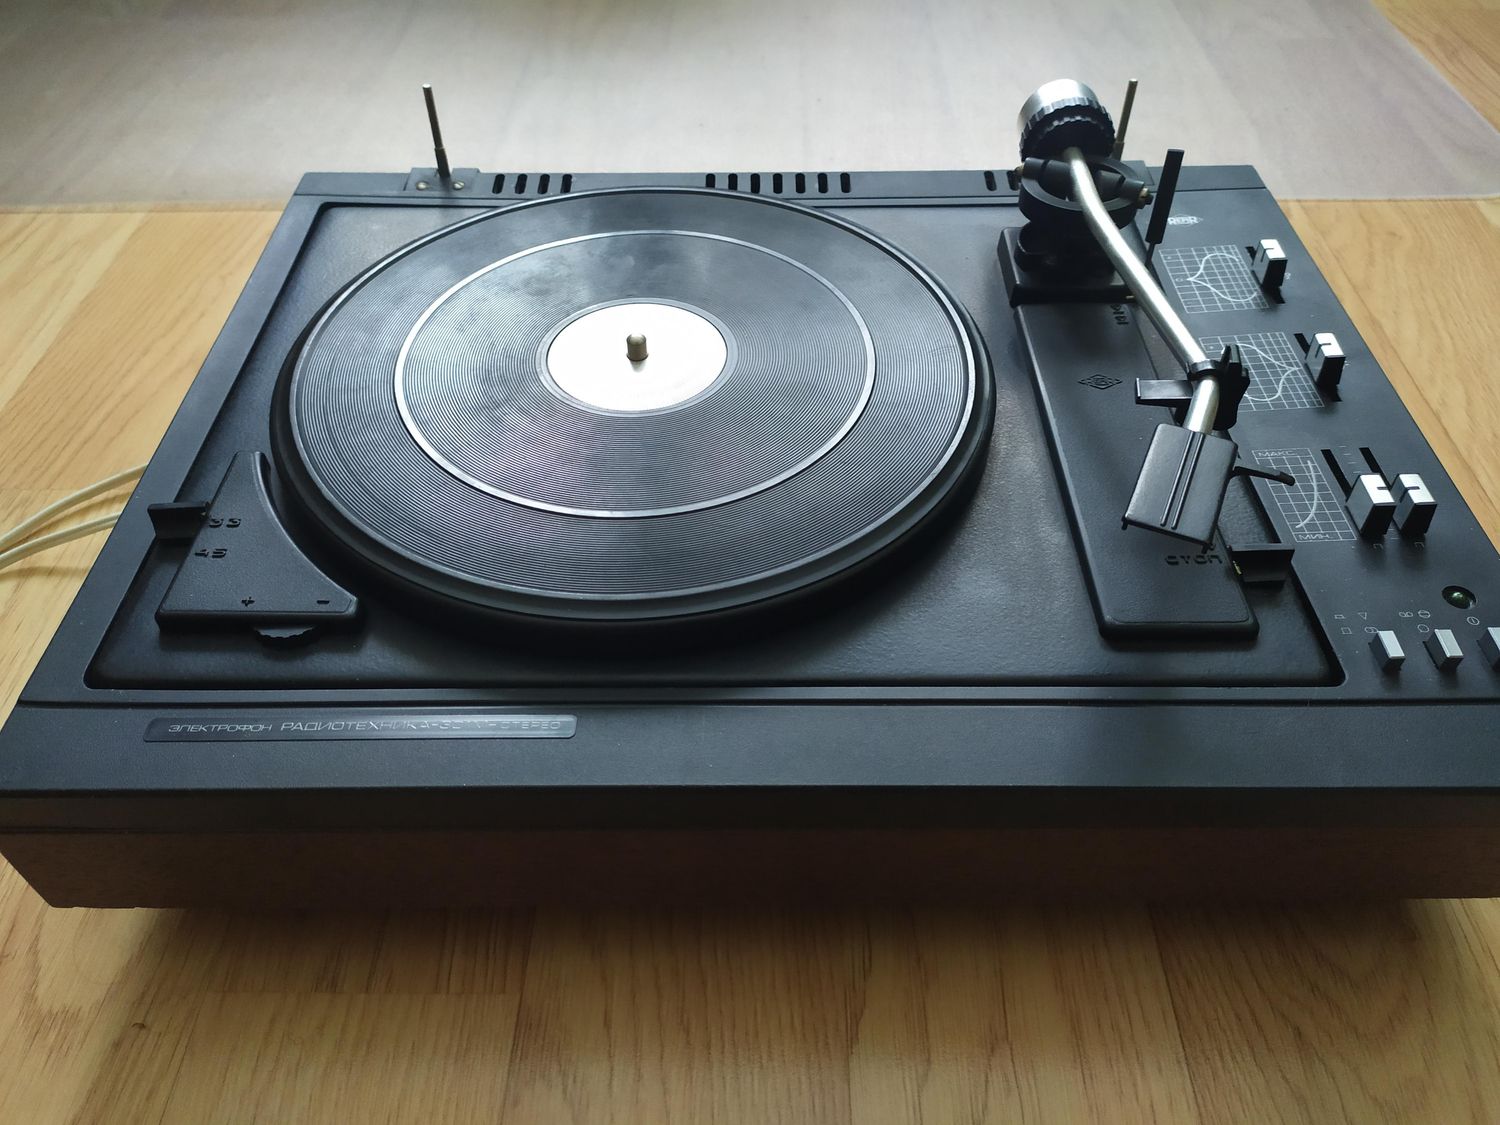 How Do I Remove My Turntable From Old Record Player